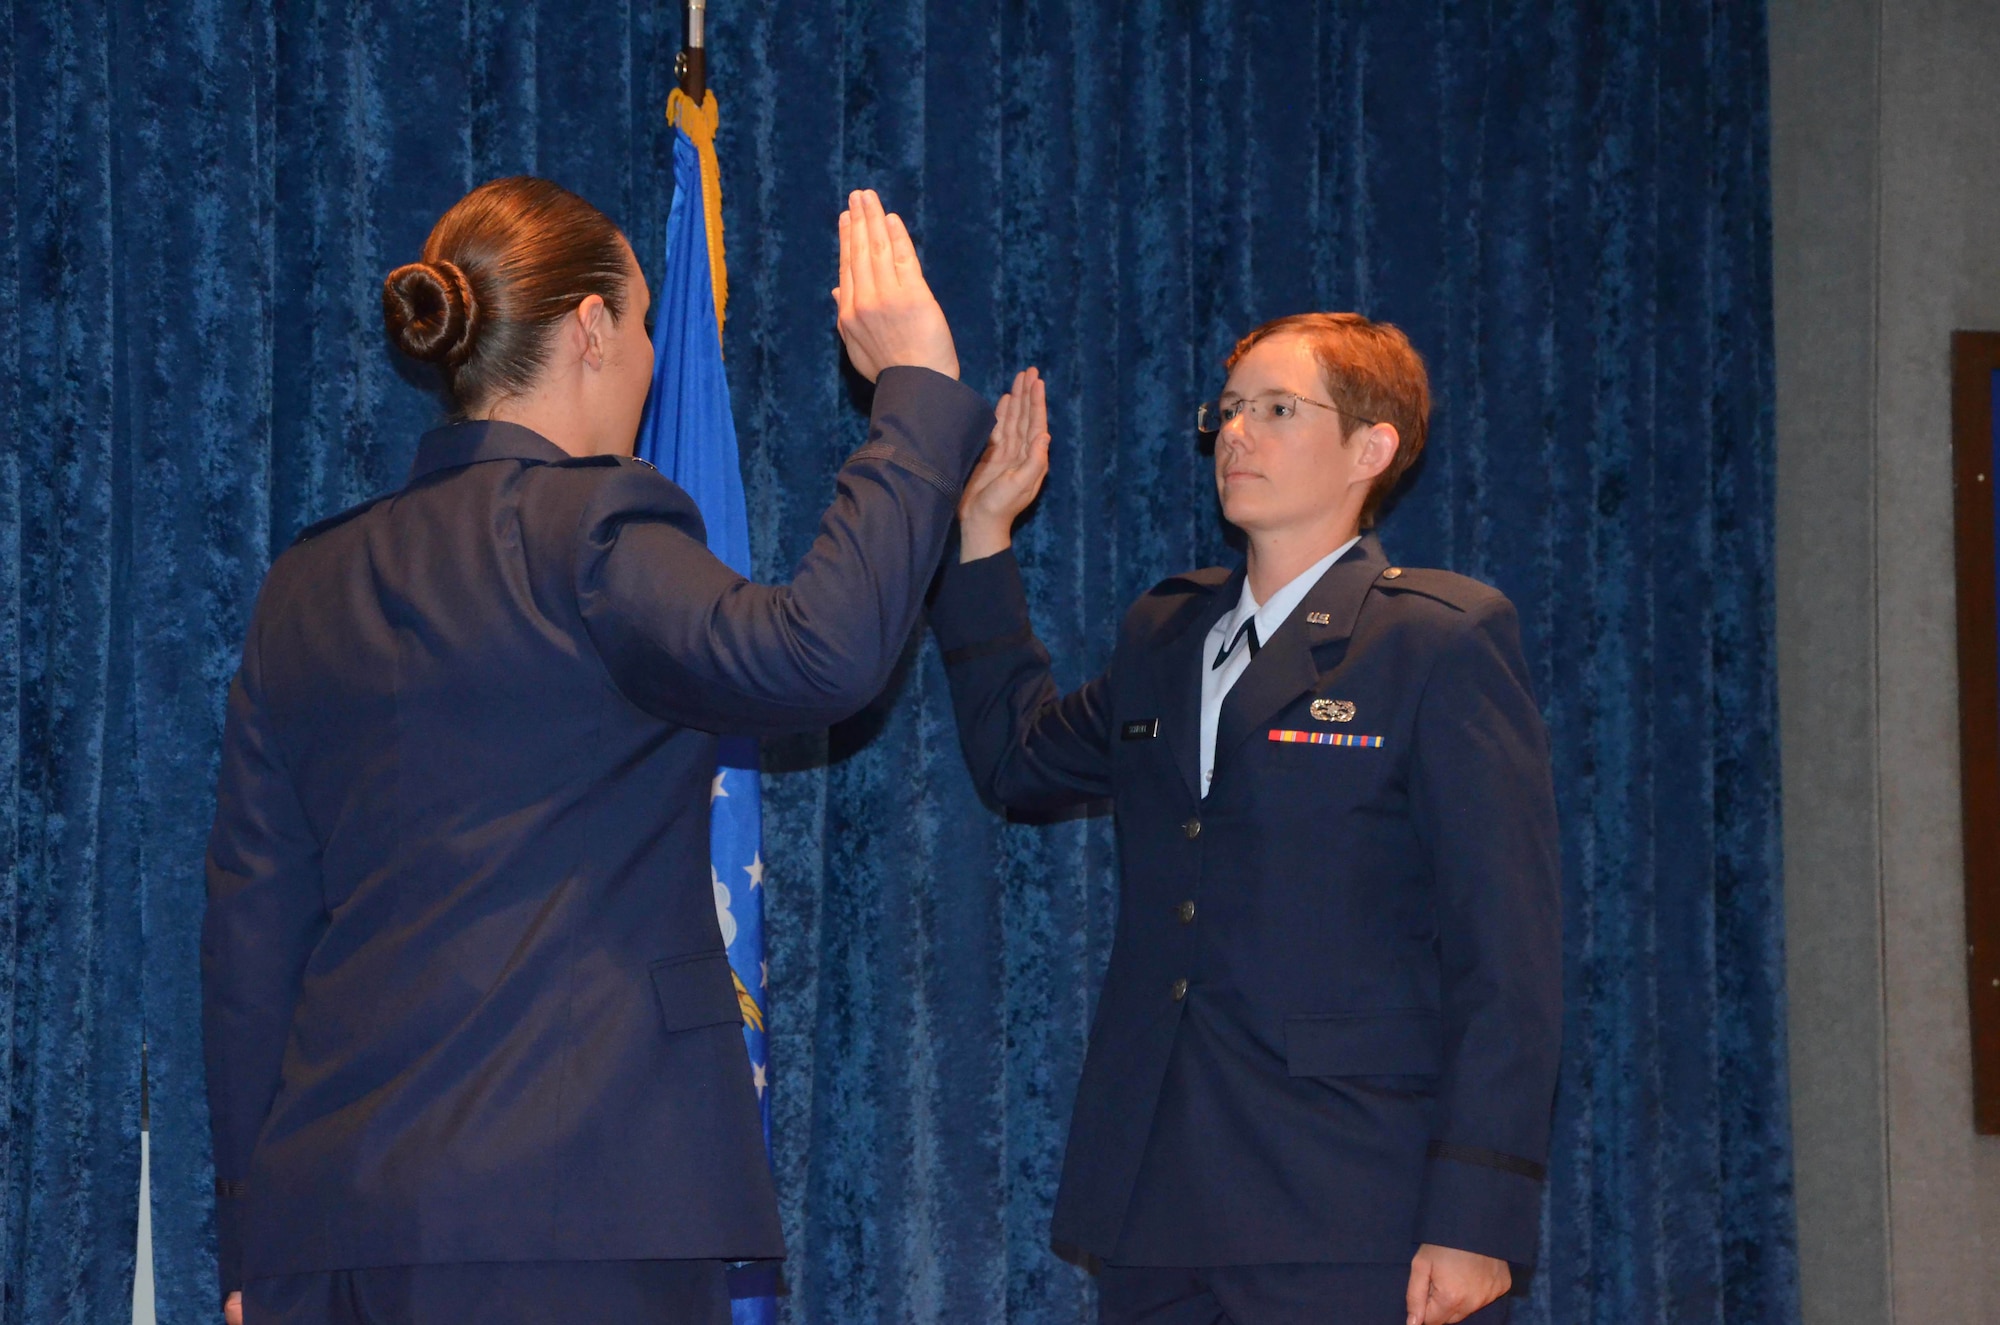 1st Lt. Ashley M. Dalessandro (left) administers the commissioning oath to Officer Trainee Cynthia A. Schroll during a ceremony at Maxwell Air Force Base, Ala.  Schroll, a former E-3 with a doctorate in analytical chemistry, joined the officer ranks after completing Air Force Officer Training School May 31, 2019.  (U.S. Air Force photo by Susan A. Romano)